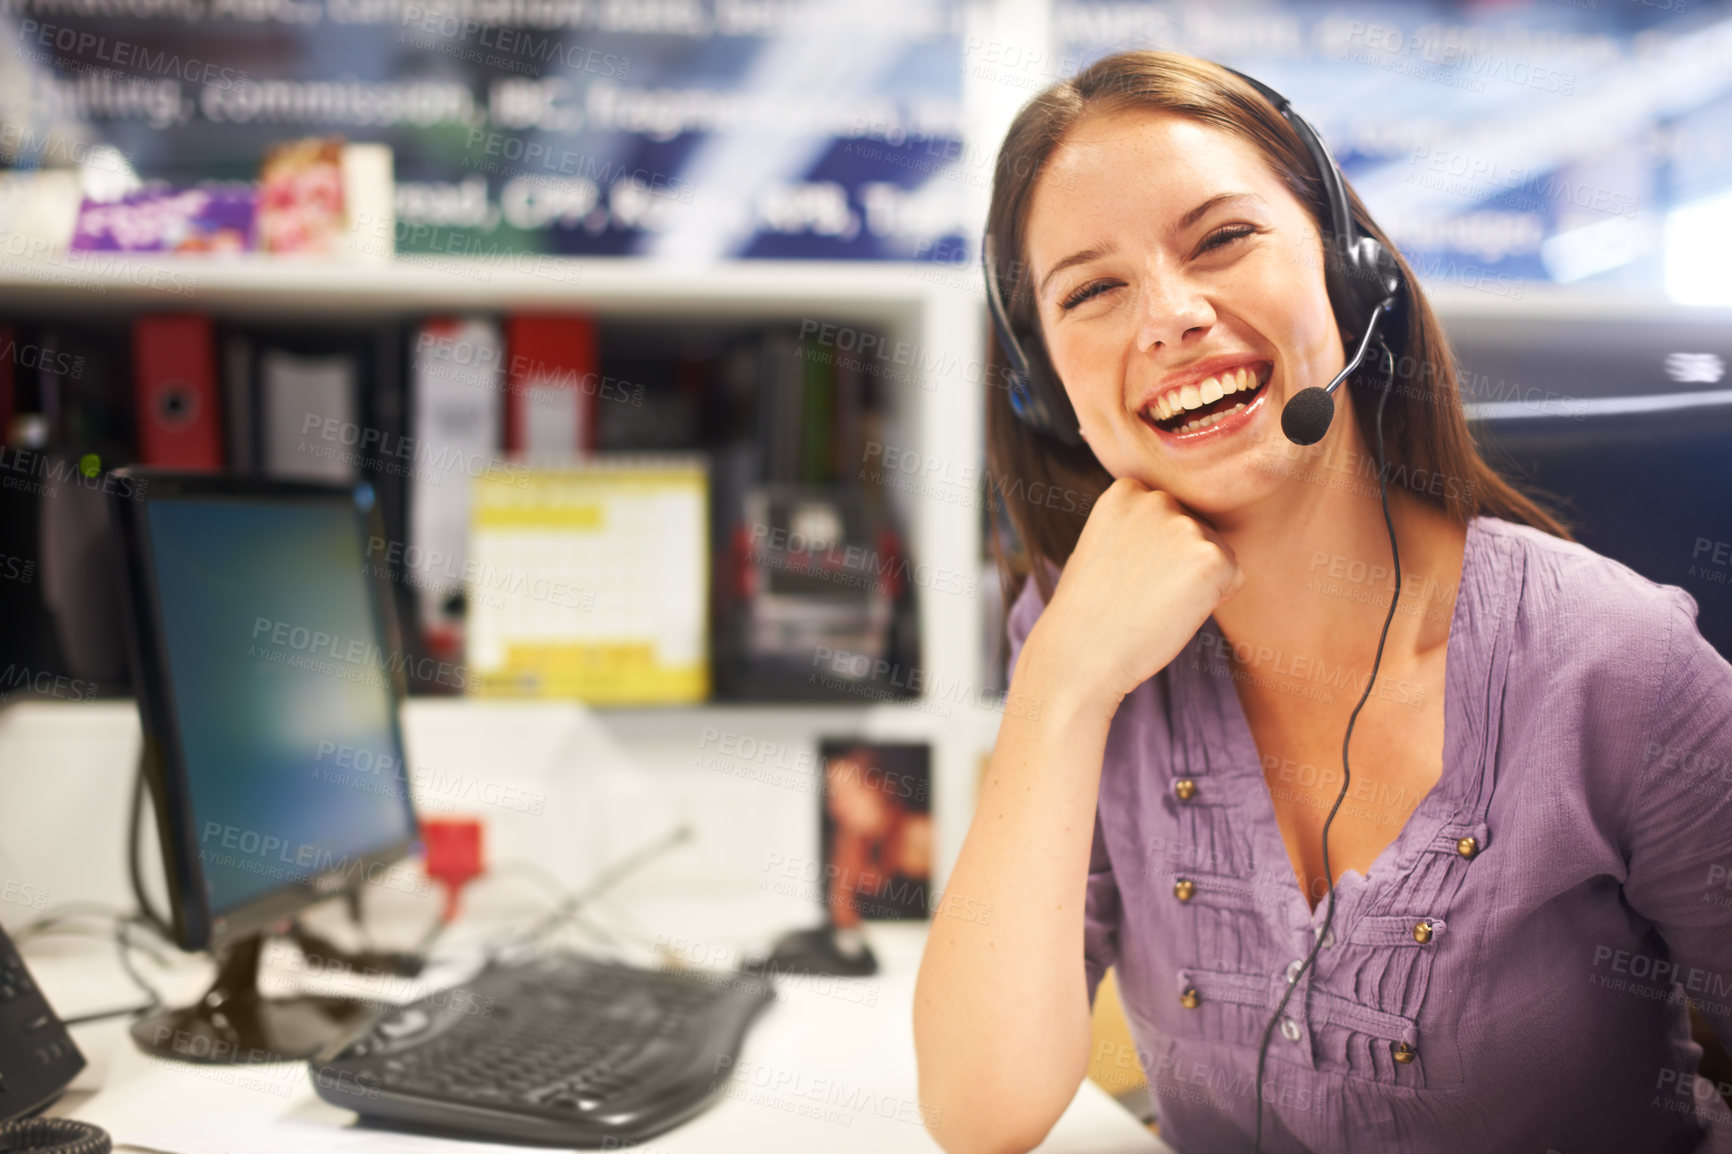 Buy stock photo Cropped portrait of a young businesswoman wearing a headset at her desk